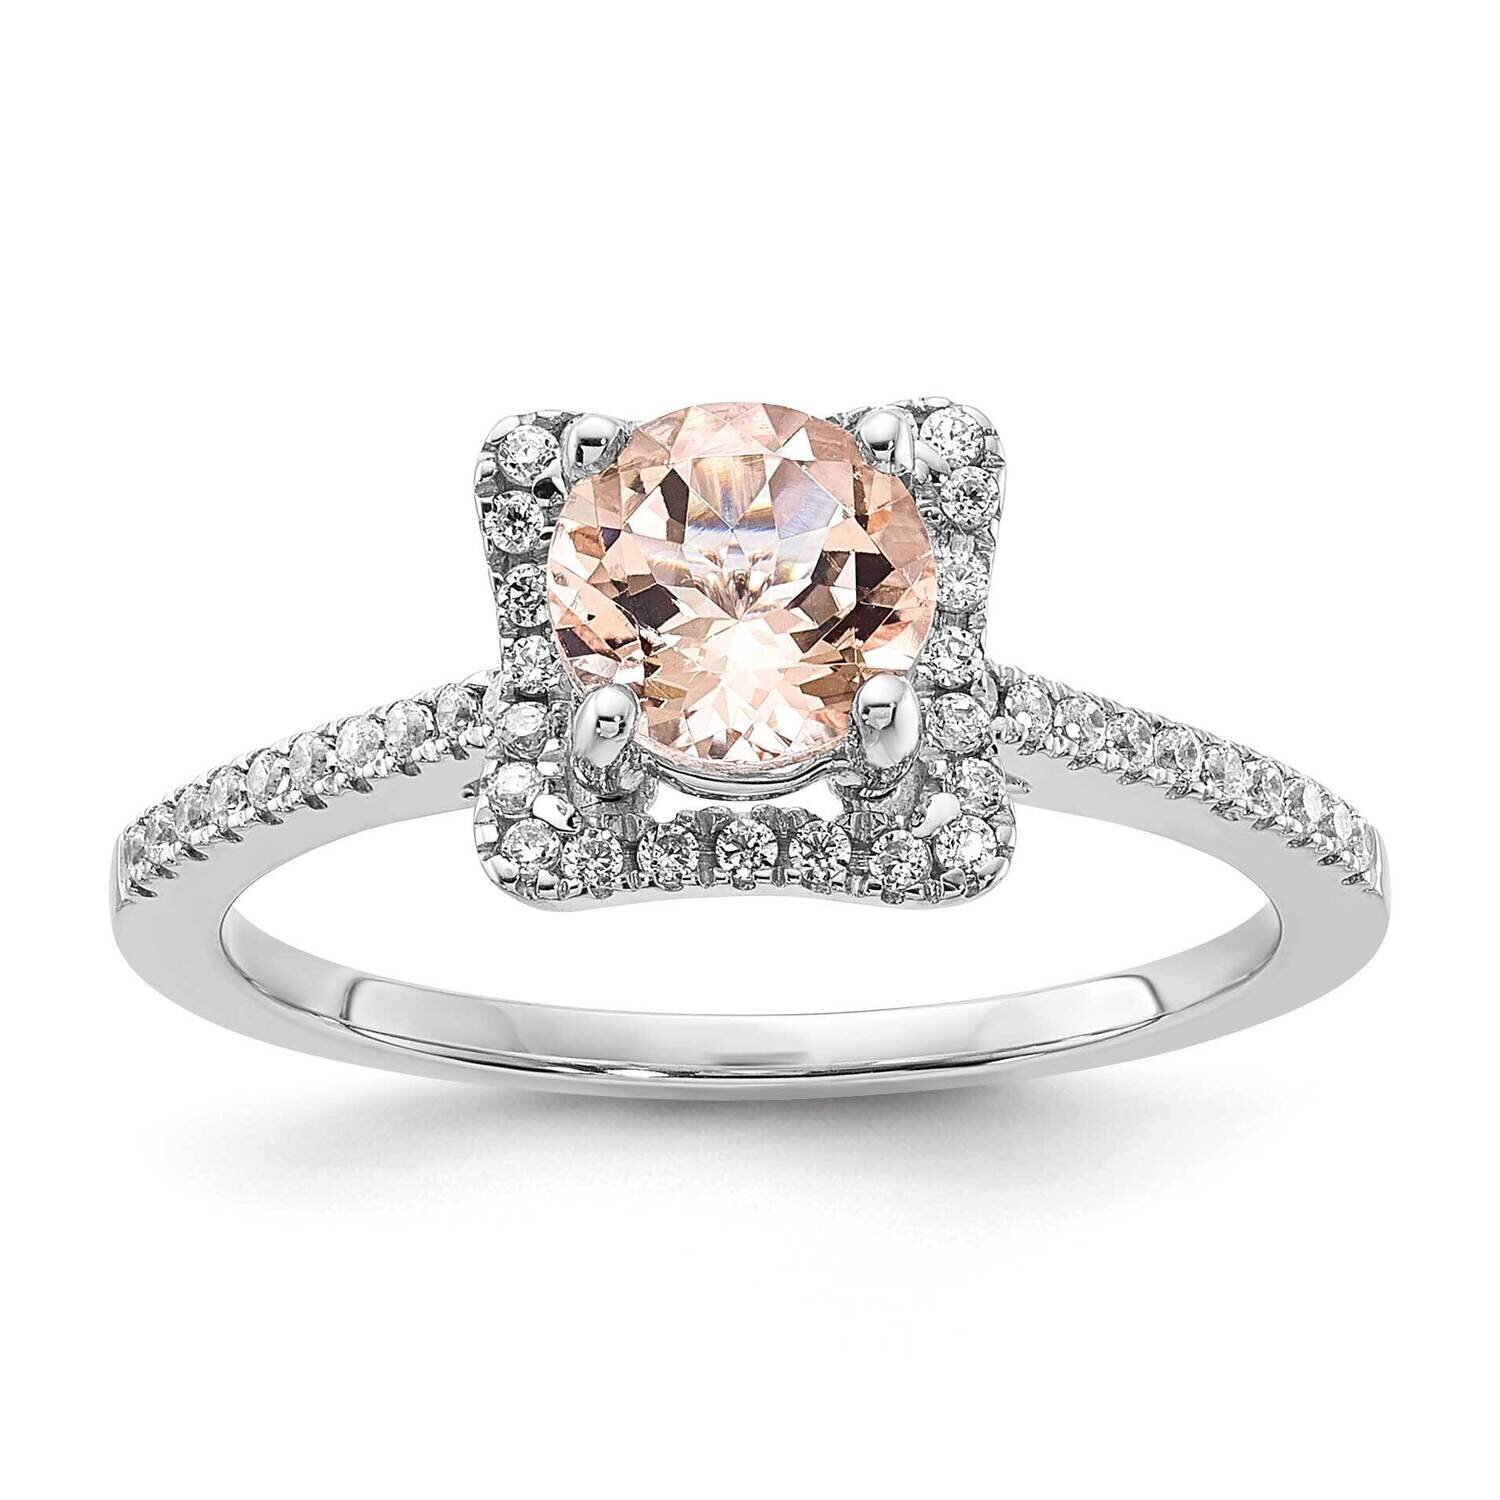 Sterling Silver Polished Morganite & CZ Ring RM3662-MG-SSWCZ-7